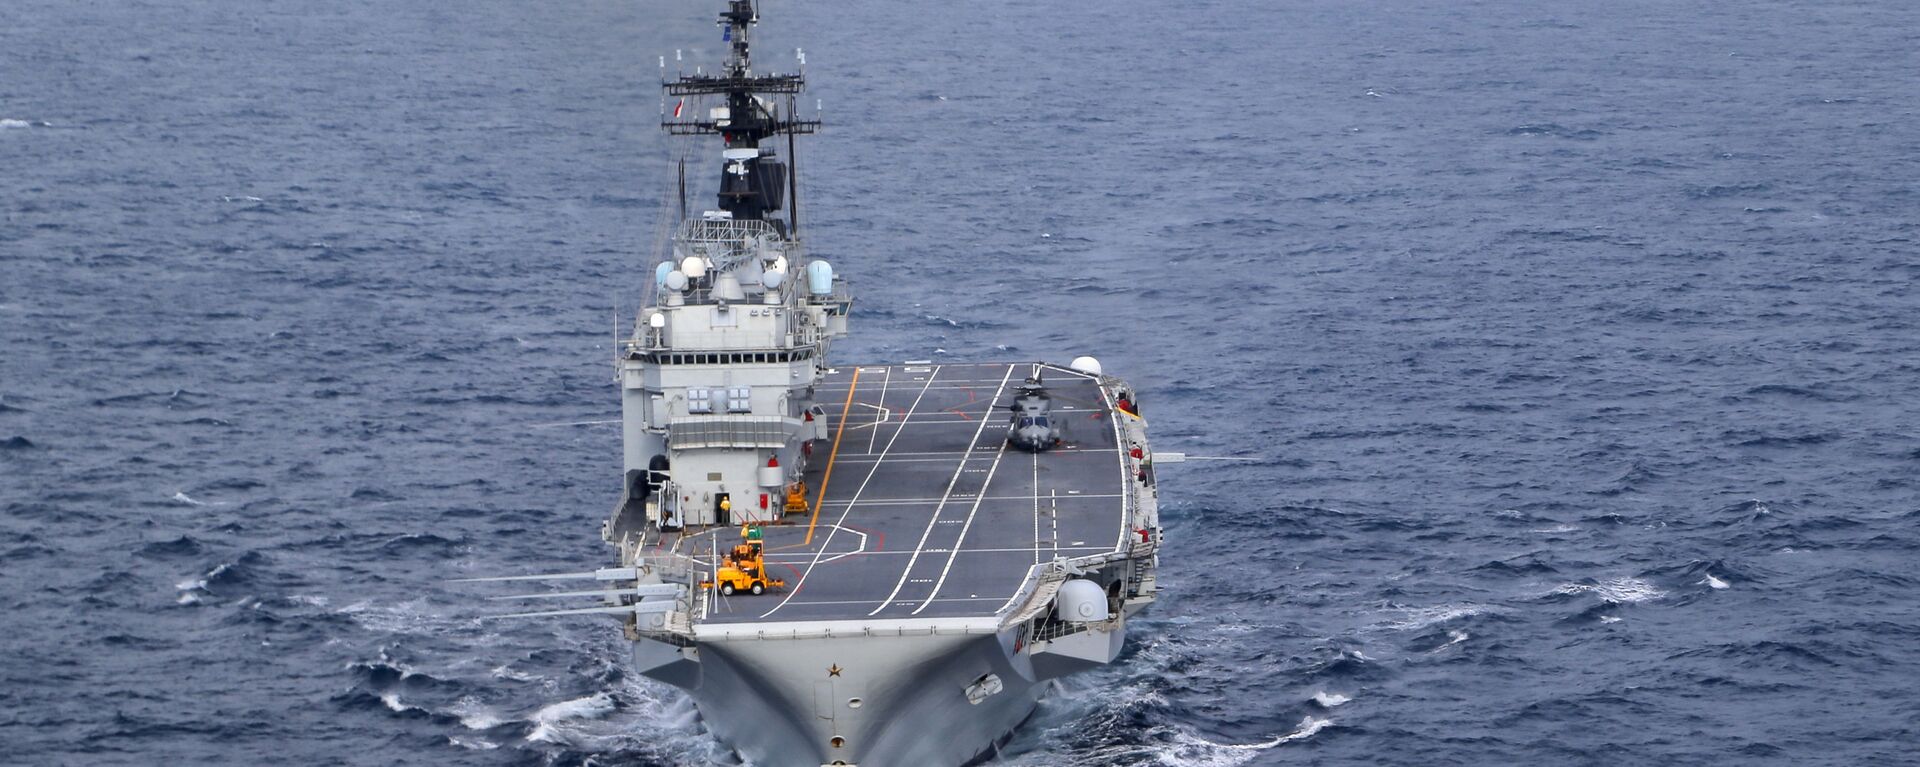 In this Friday, Nov. 25, 2016 photo, the Italian Navy Giuseppe Garibaldi light aircraft carrier, seen from a helicopter, sails on the Mediterranean Sea, off the coast of Sicily, part of the European Union's naval force Operation Sophia. Operation Sophia was launched to disrupt human smuggling operations in the Central Mediterranean. - Sputnik International, 1920, 29.09.2022